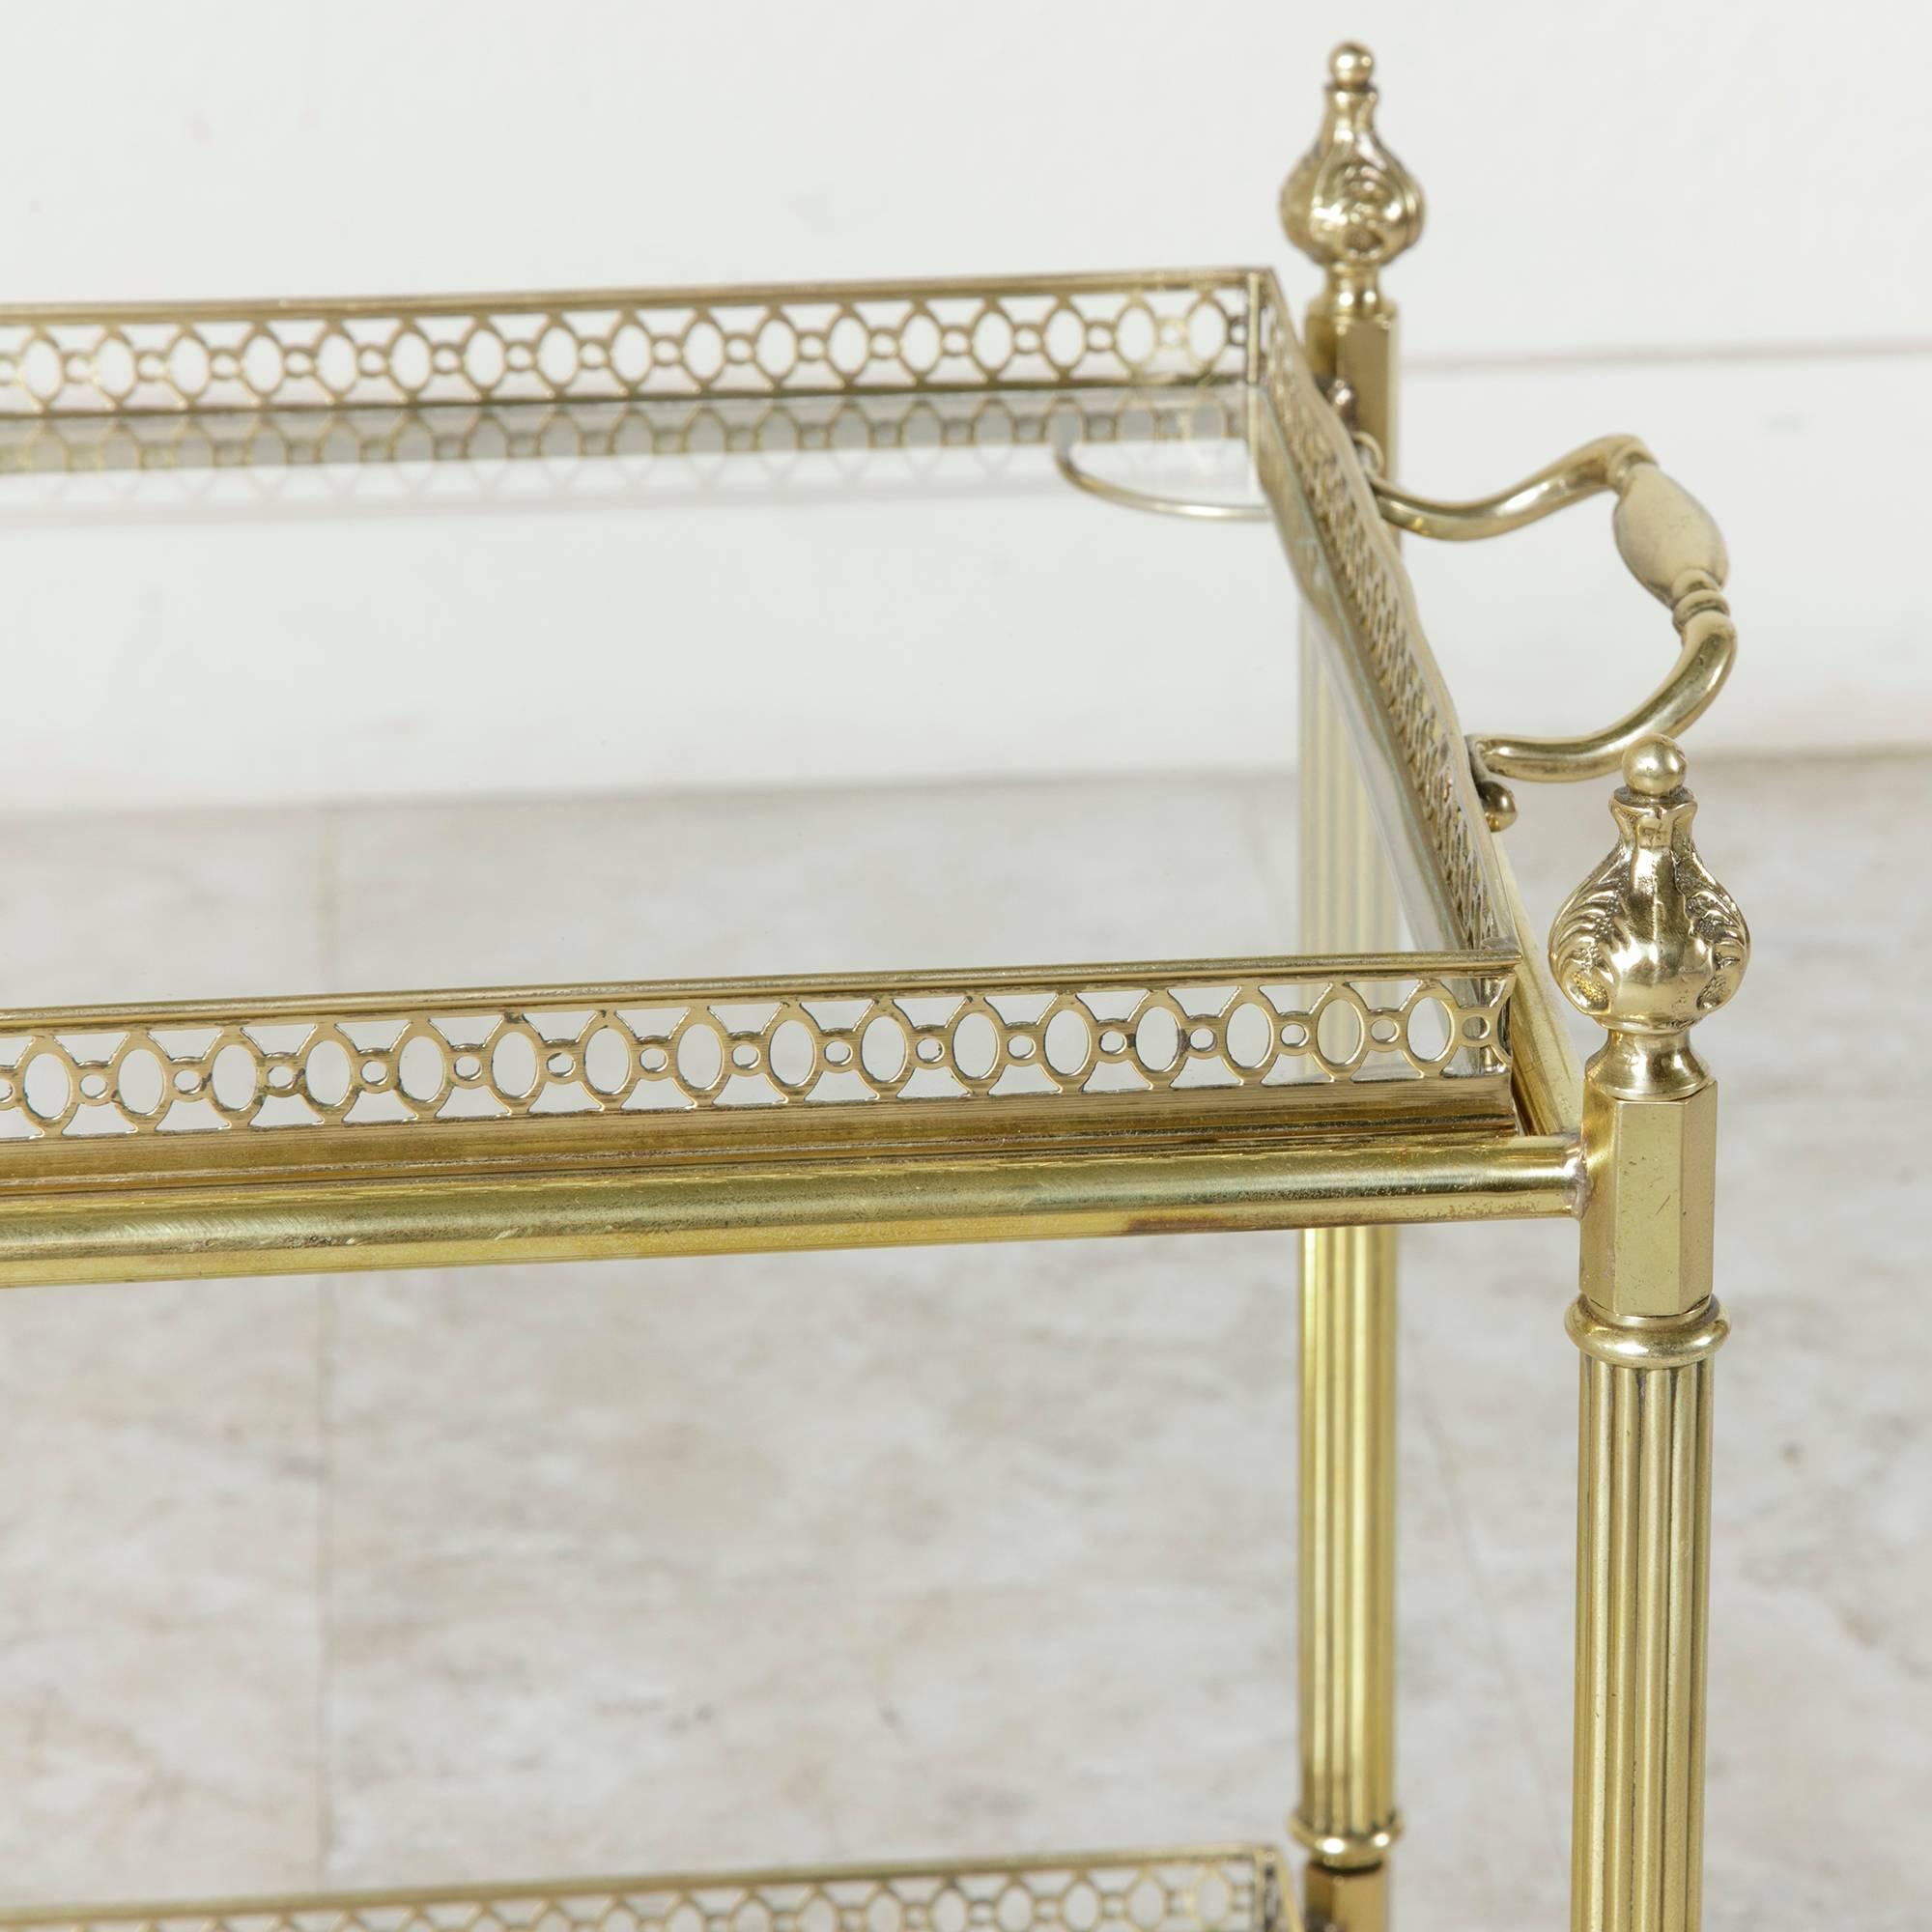 Blending well with all styles and decors, this Mid-Century brass Louis XVI style side table from France features fluted legs topped with finials as well as two removeable glass trays surrounded by brass galleries. A versatile piece, this side table